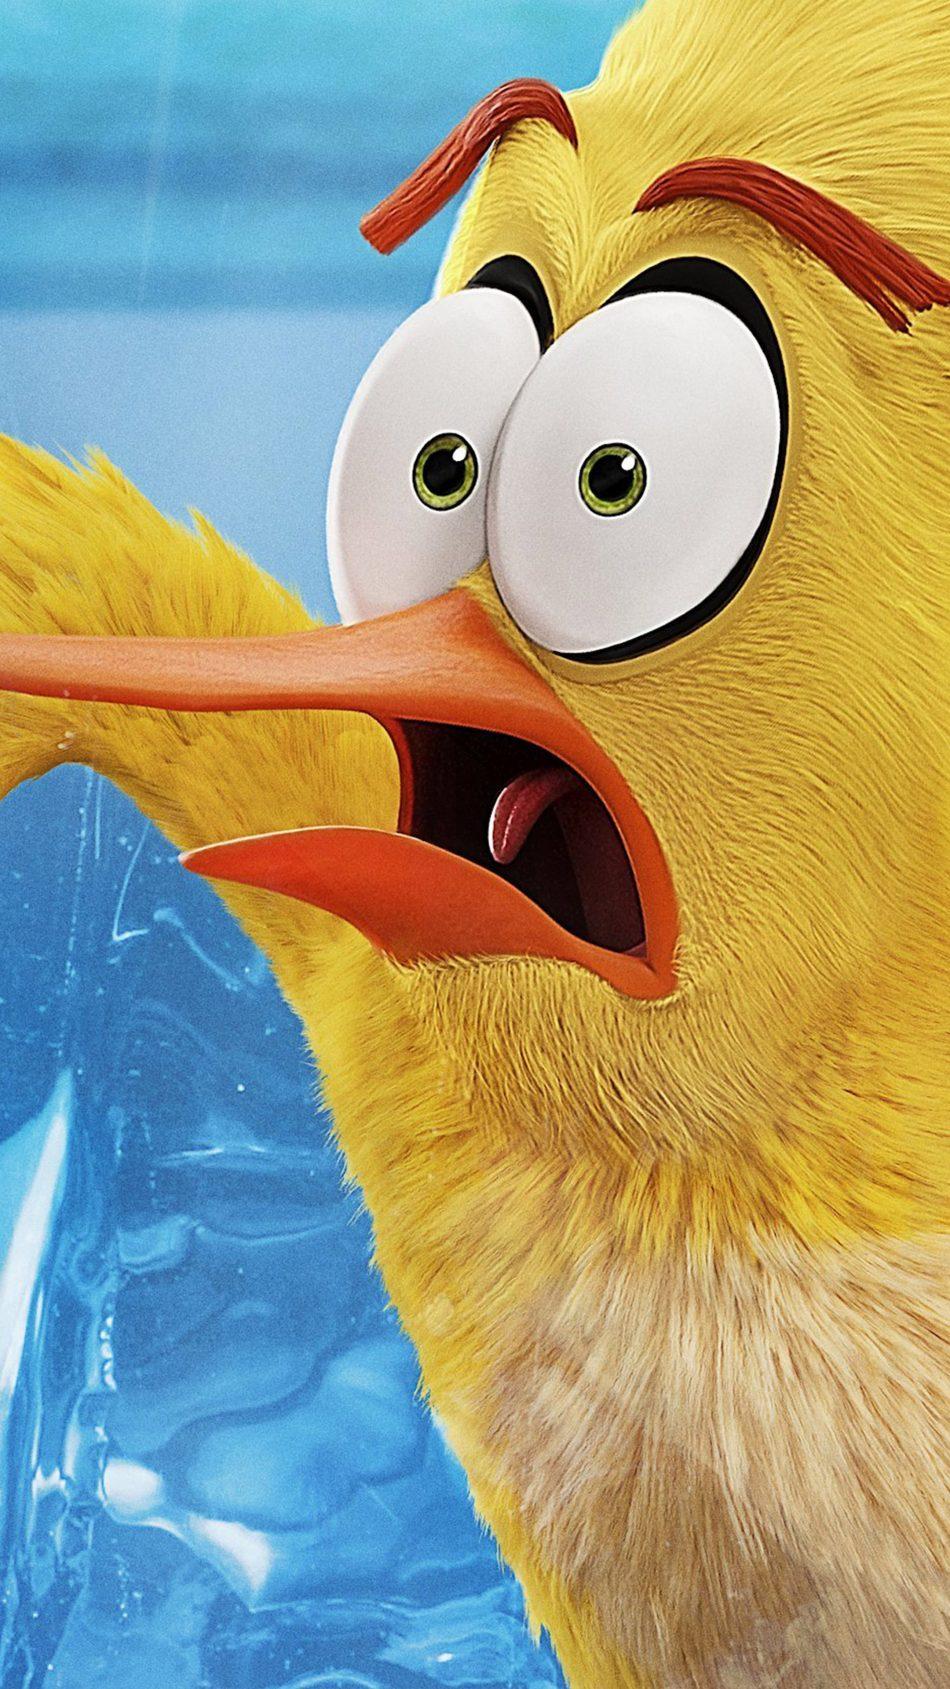 Download The Angry Birds Movie 2 Free Pure 4K Ultra HD